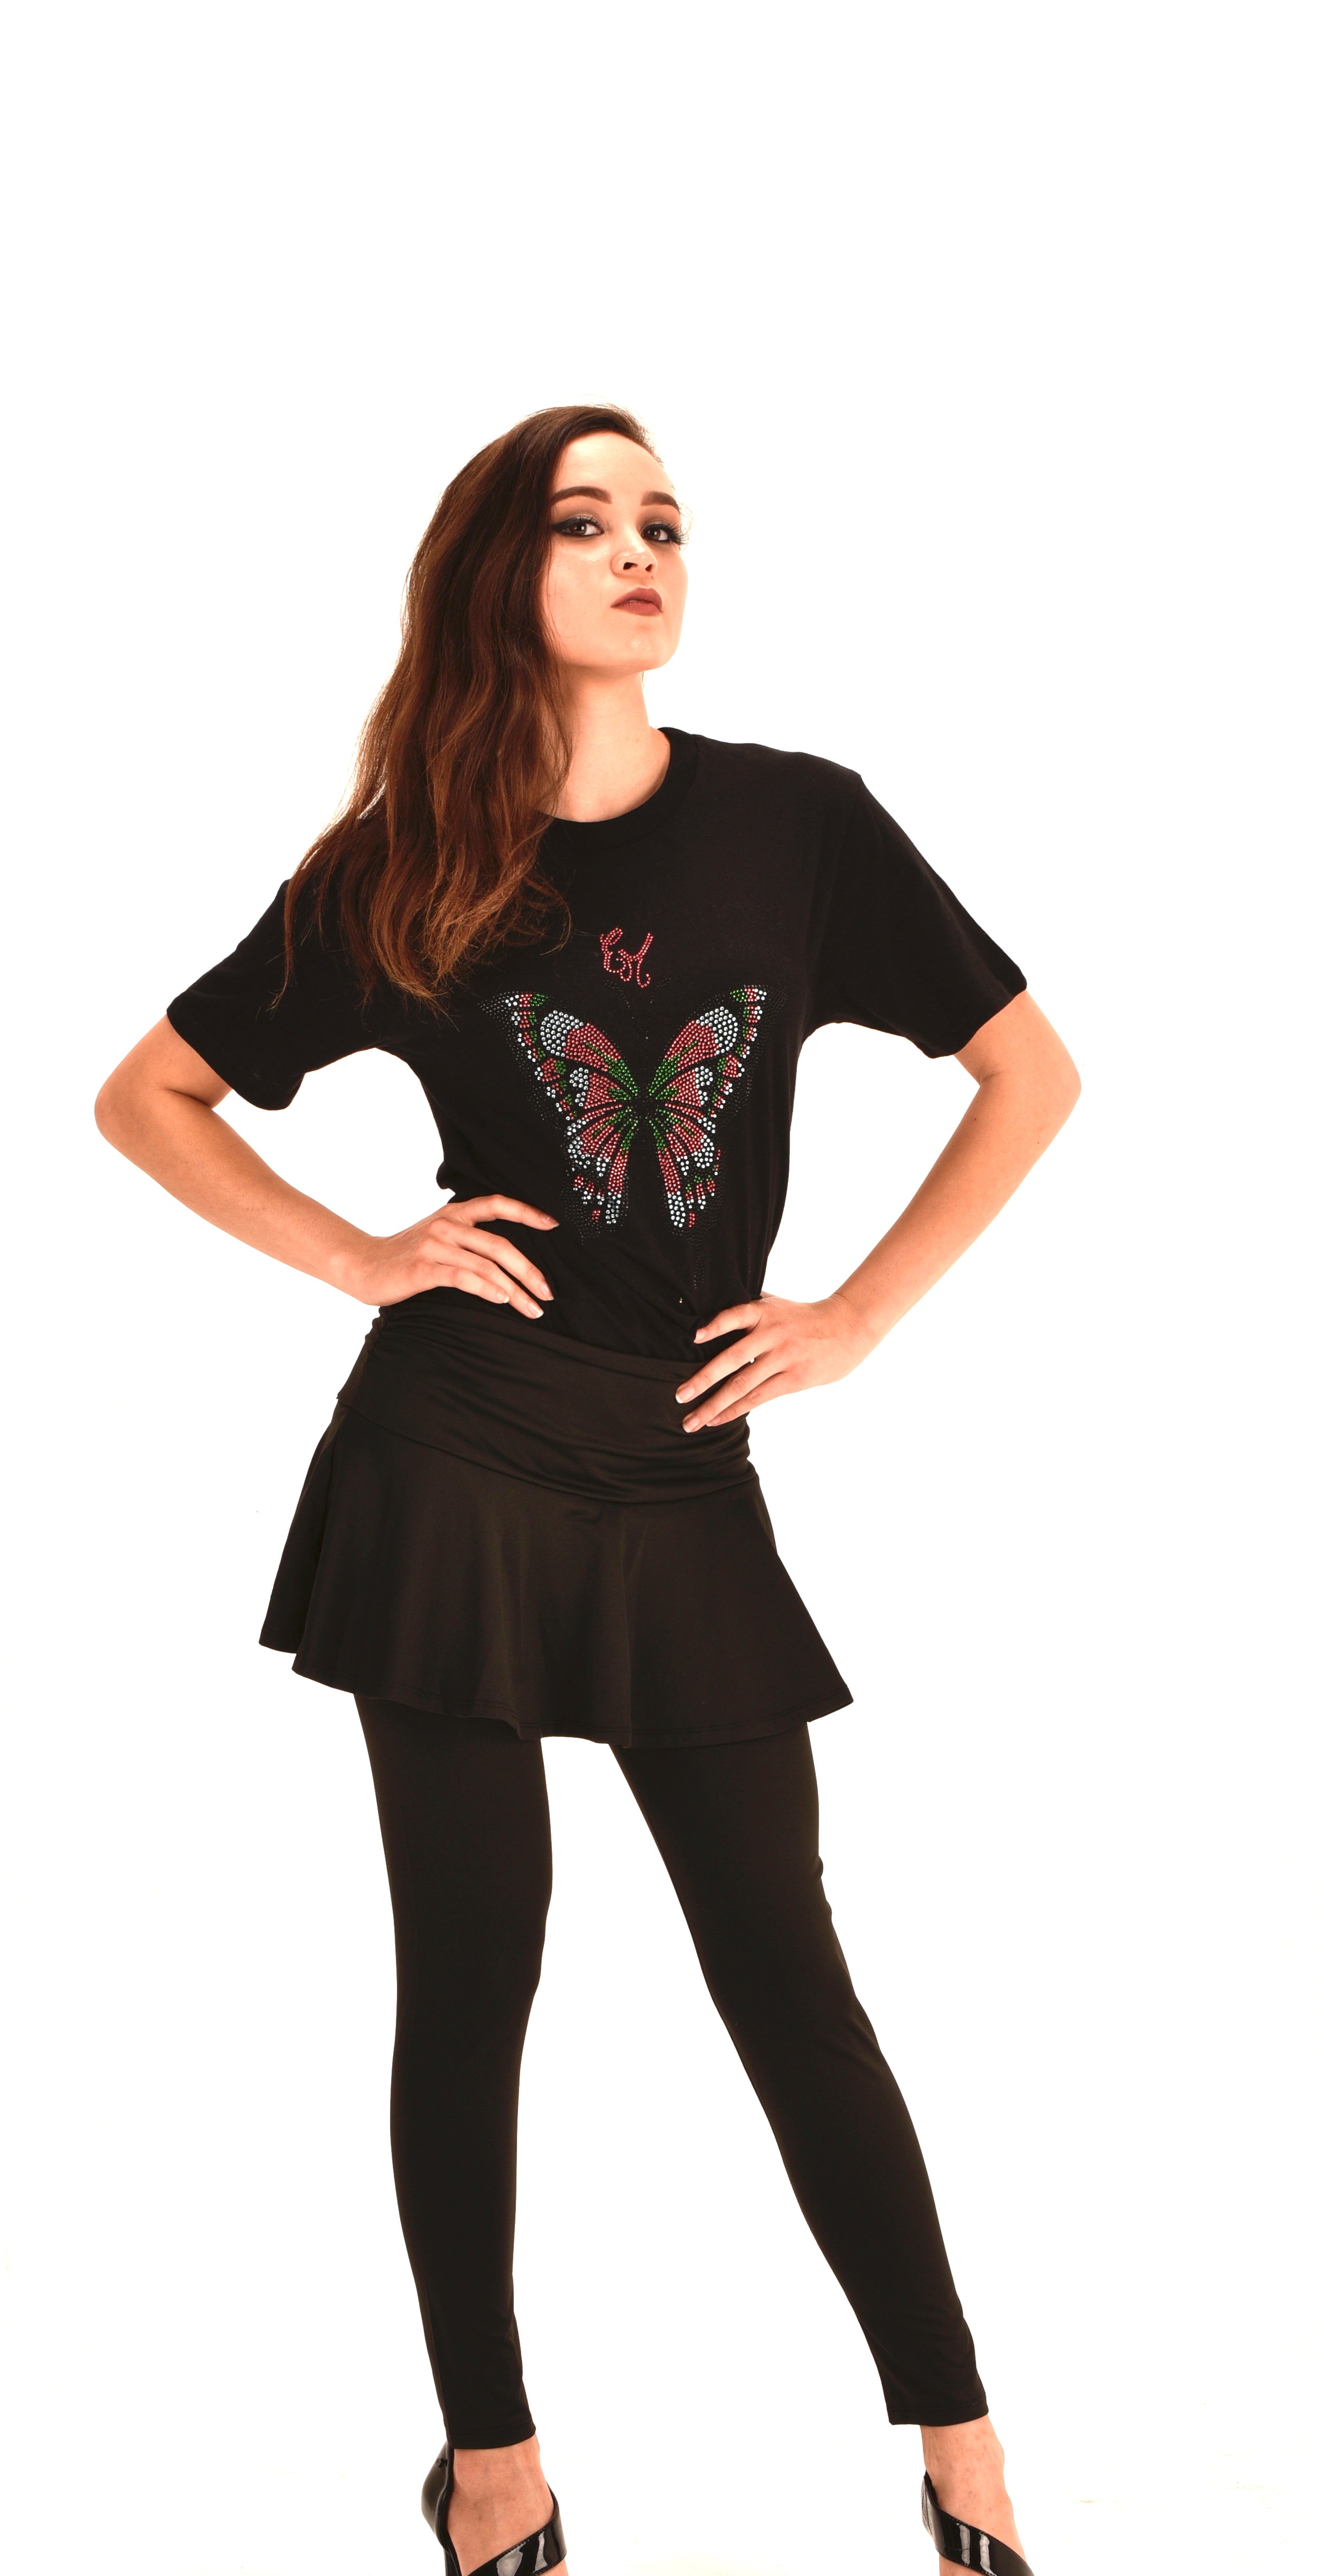 butterfly t shirt t shirts design graphic t shirts t shirt printing unique graphic t shirts  ellie mei design t shirts  logo tee women's black t shirts  gifts idea christmas gifts birthday gifts butterfly festival t shirts  fitted t shirt 